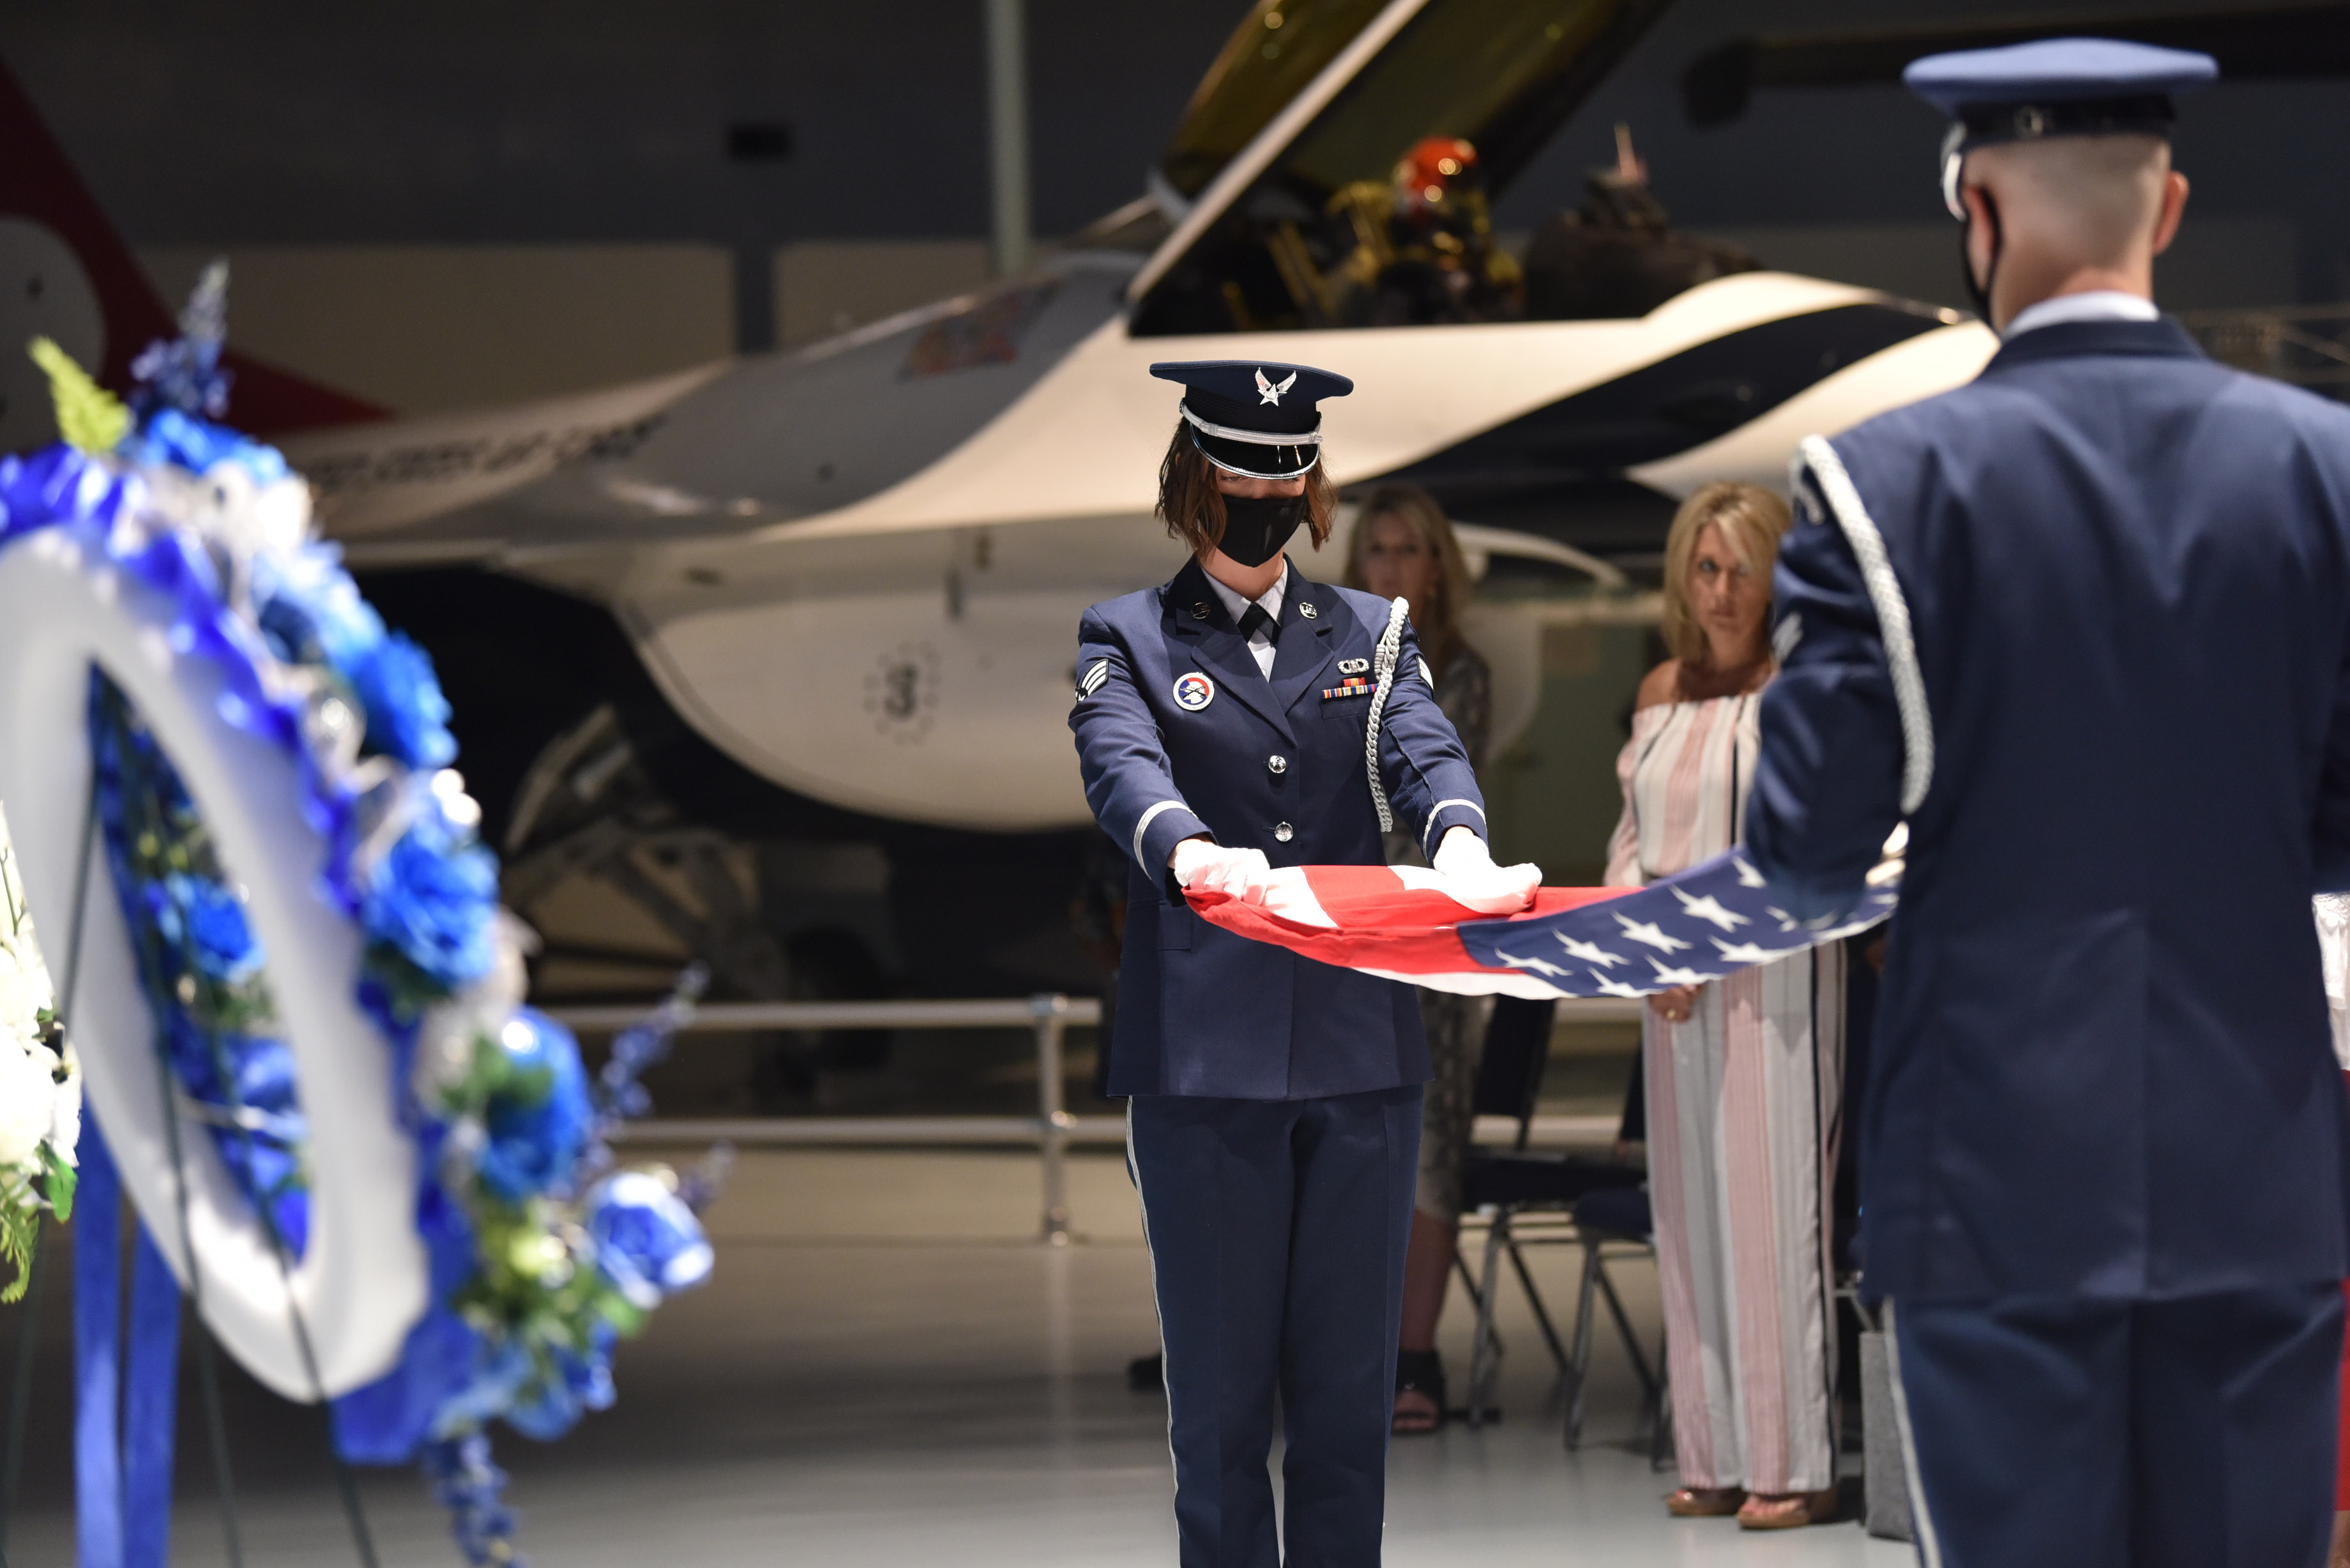 team-robins-honors-the-fallen-in-annual-ceremony-robins-air-force